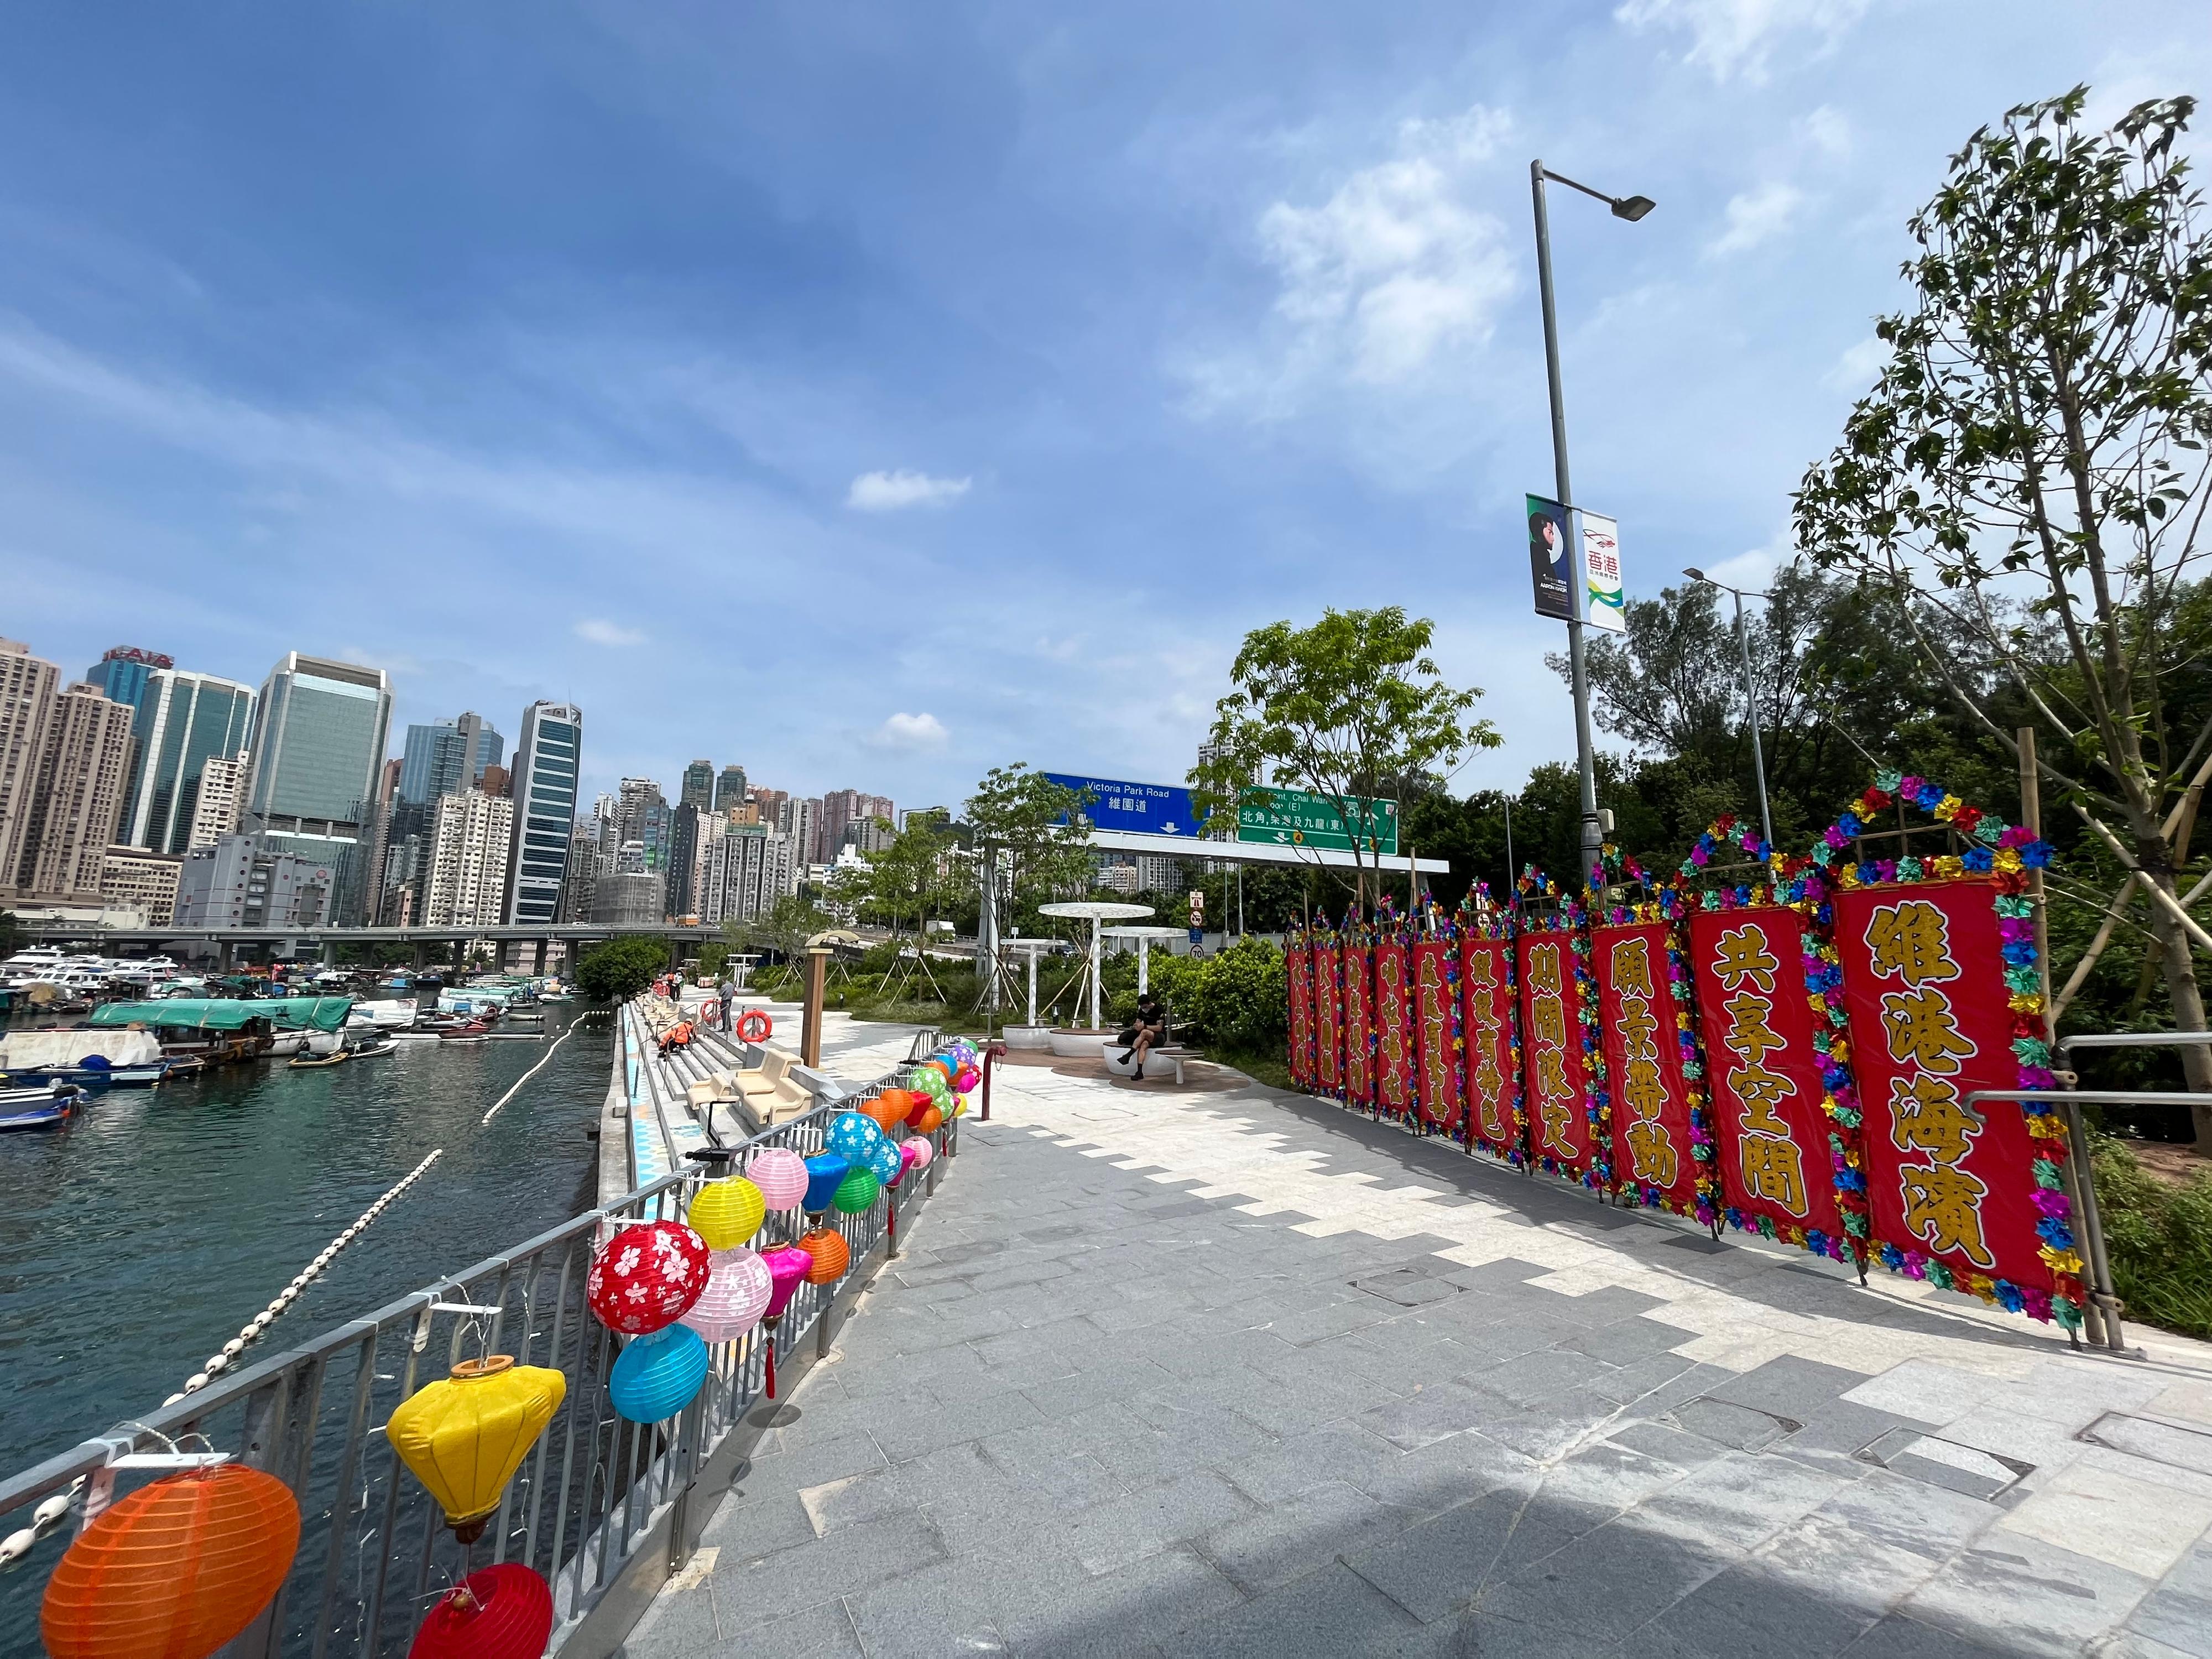 The Revitalised Typhoon Shelter Precinct at the Causeway Bay Typhoon Shelter waterfront of Victoria Park Road will be officially opened next Friday (September 9). The Precinct provides 90-metre-long "harbour steps" to bring the public closer to the waterbody, enabling visitors to enjoy an unobstructed view of the typhoon shelter and Victoria Harbour's sunset.